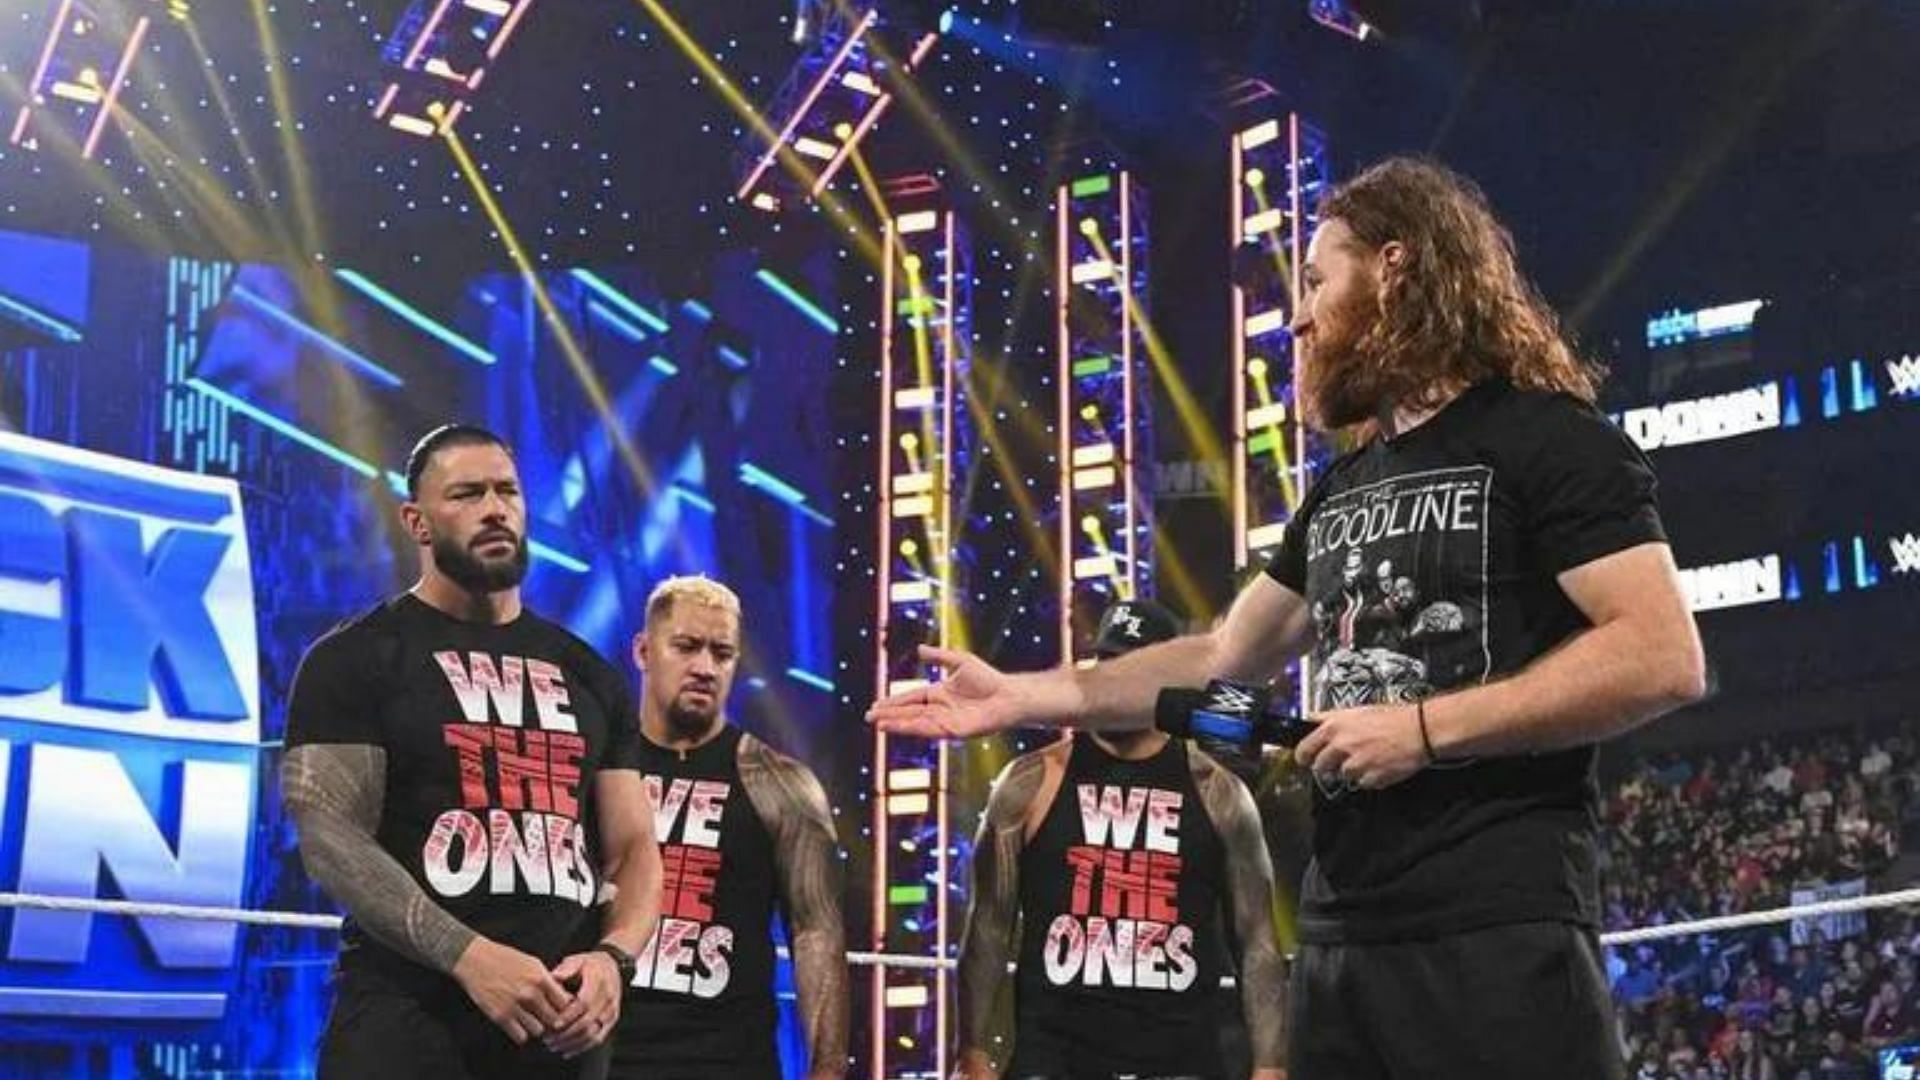 Sami Zayn was given an Honorary Uce shirt by Roman Reigns on SmackDown